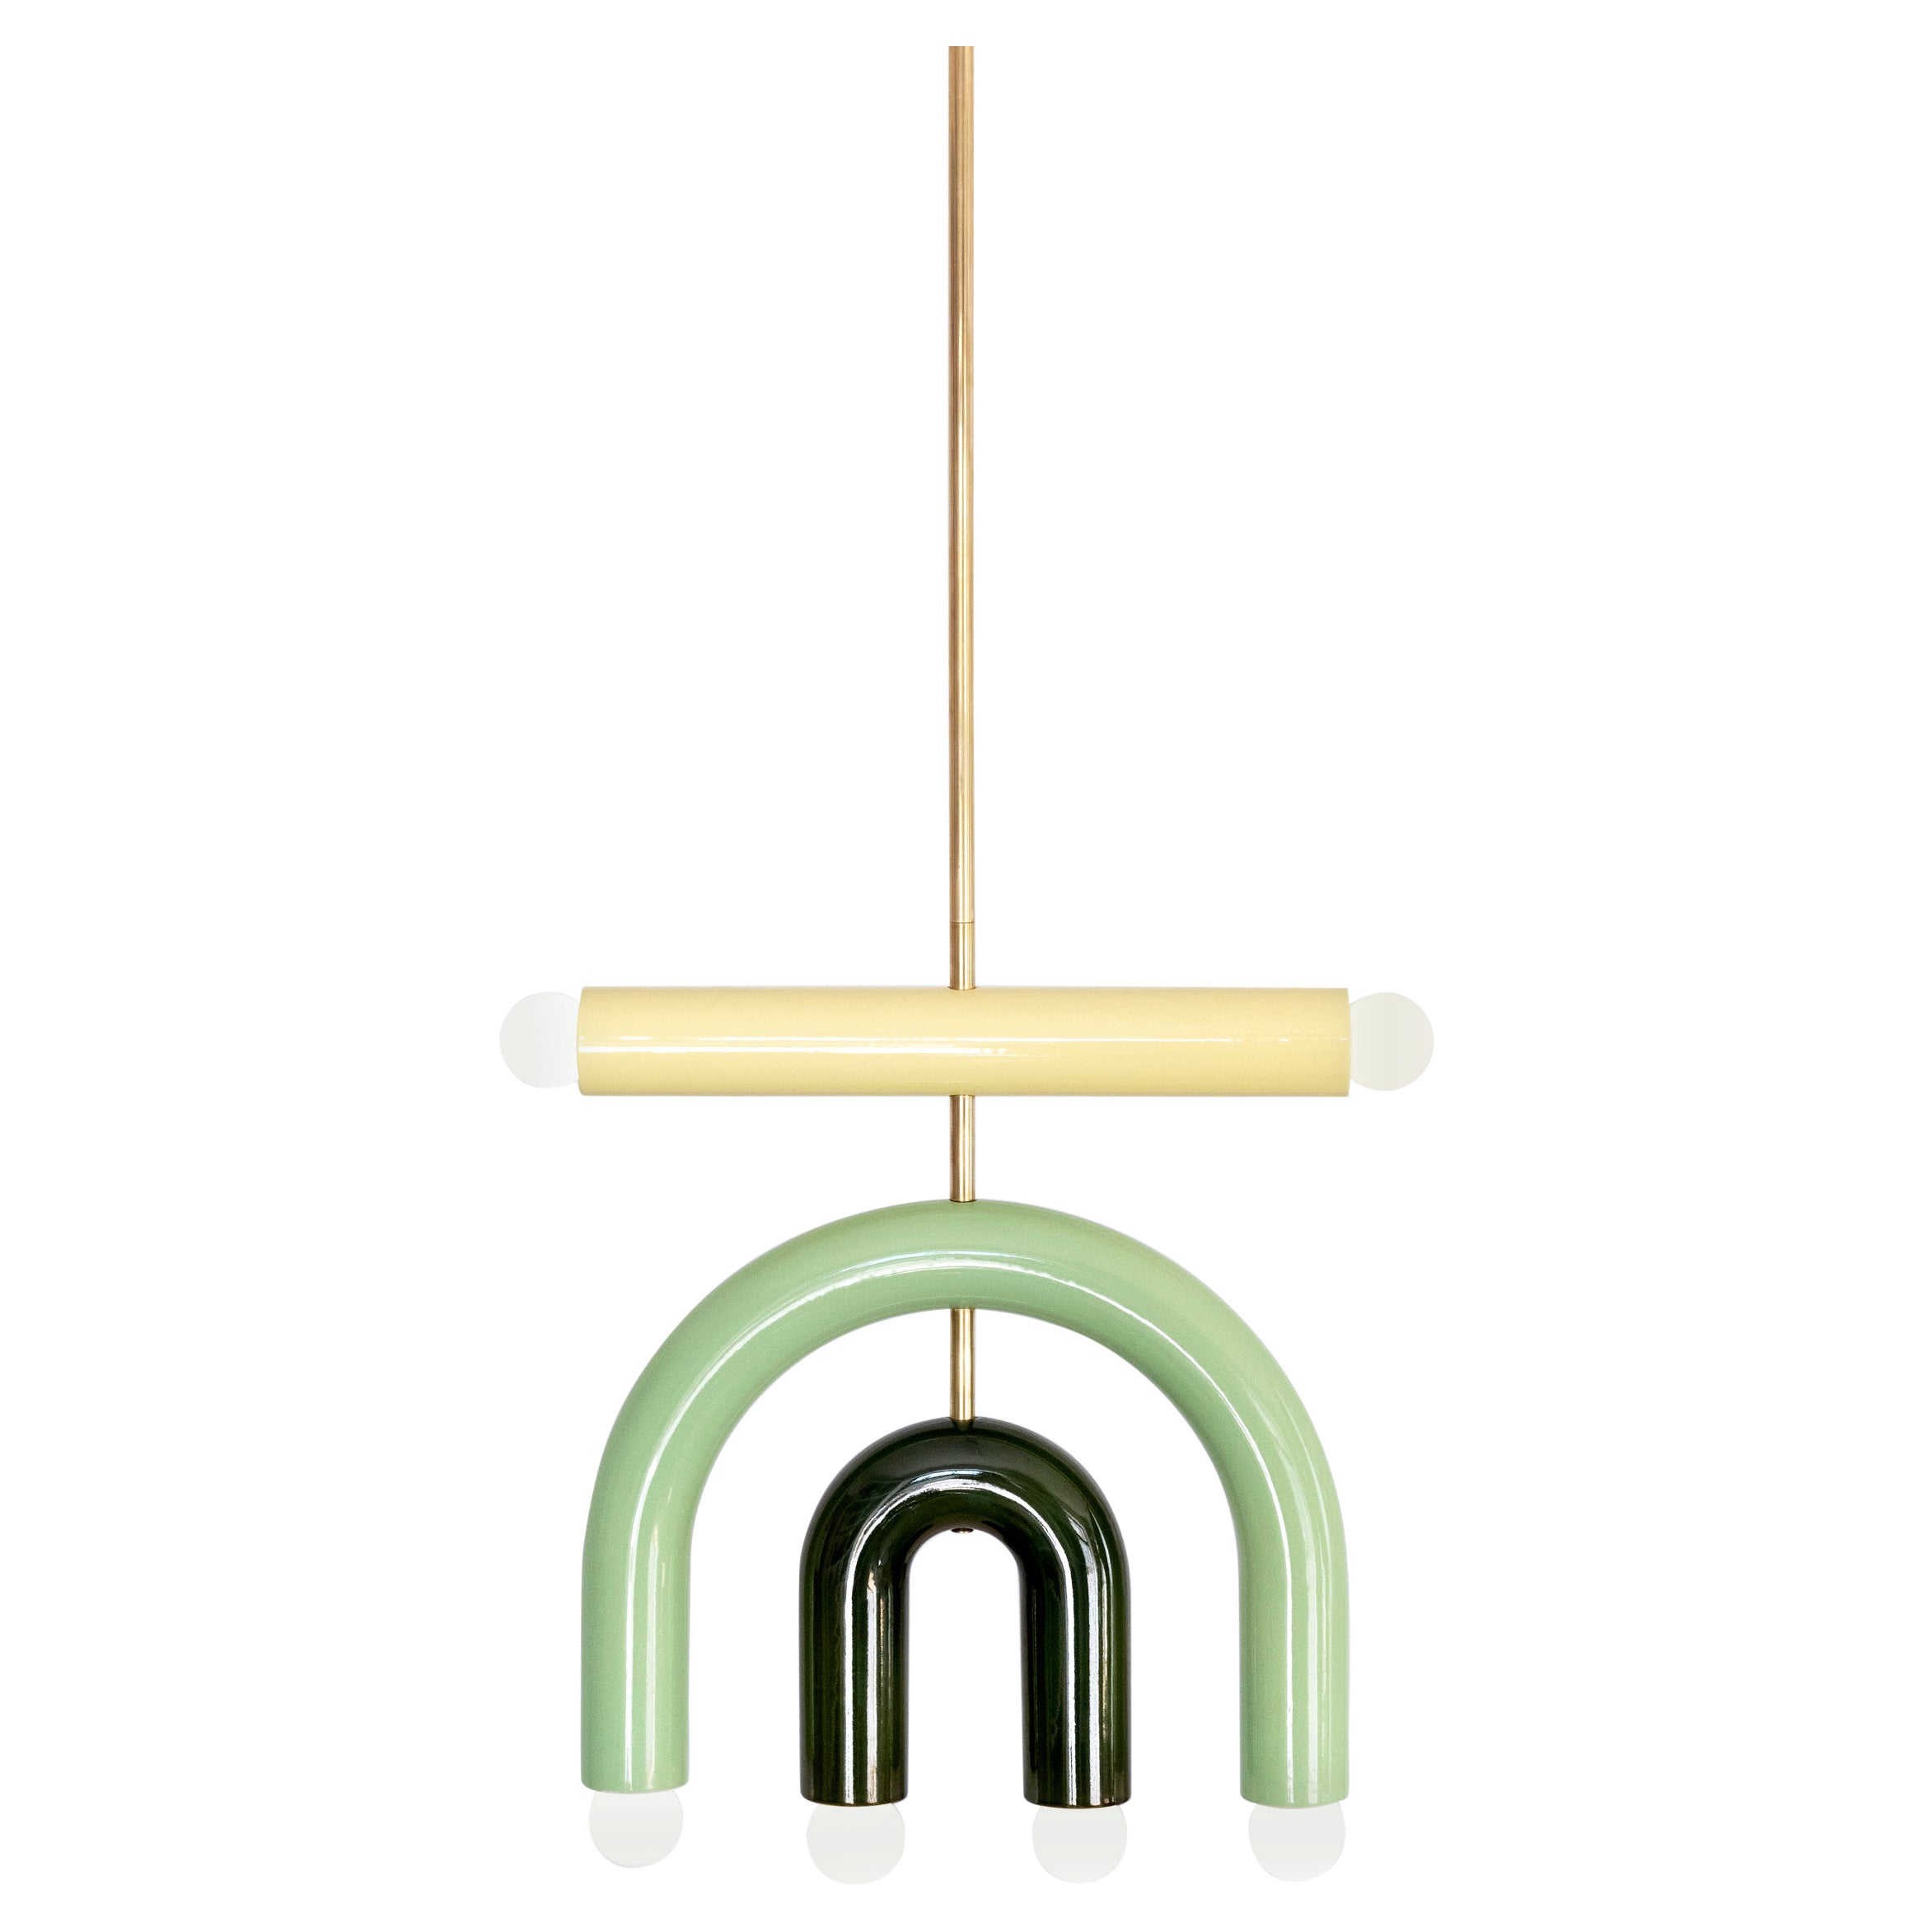 TRN D1 Pendant lamp / ceiling lamp / chandelier 
Designer: Pani Jurek

Dimensions: H 37.5 x 35 x 5 cm
Model shown: Ochre

Bulb (not included): E27/E26, compatible with US electric system

Materials: Hand glazed ceramic and brass
Rod: brass, length